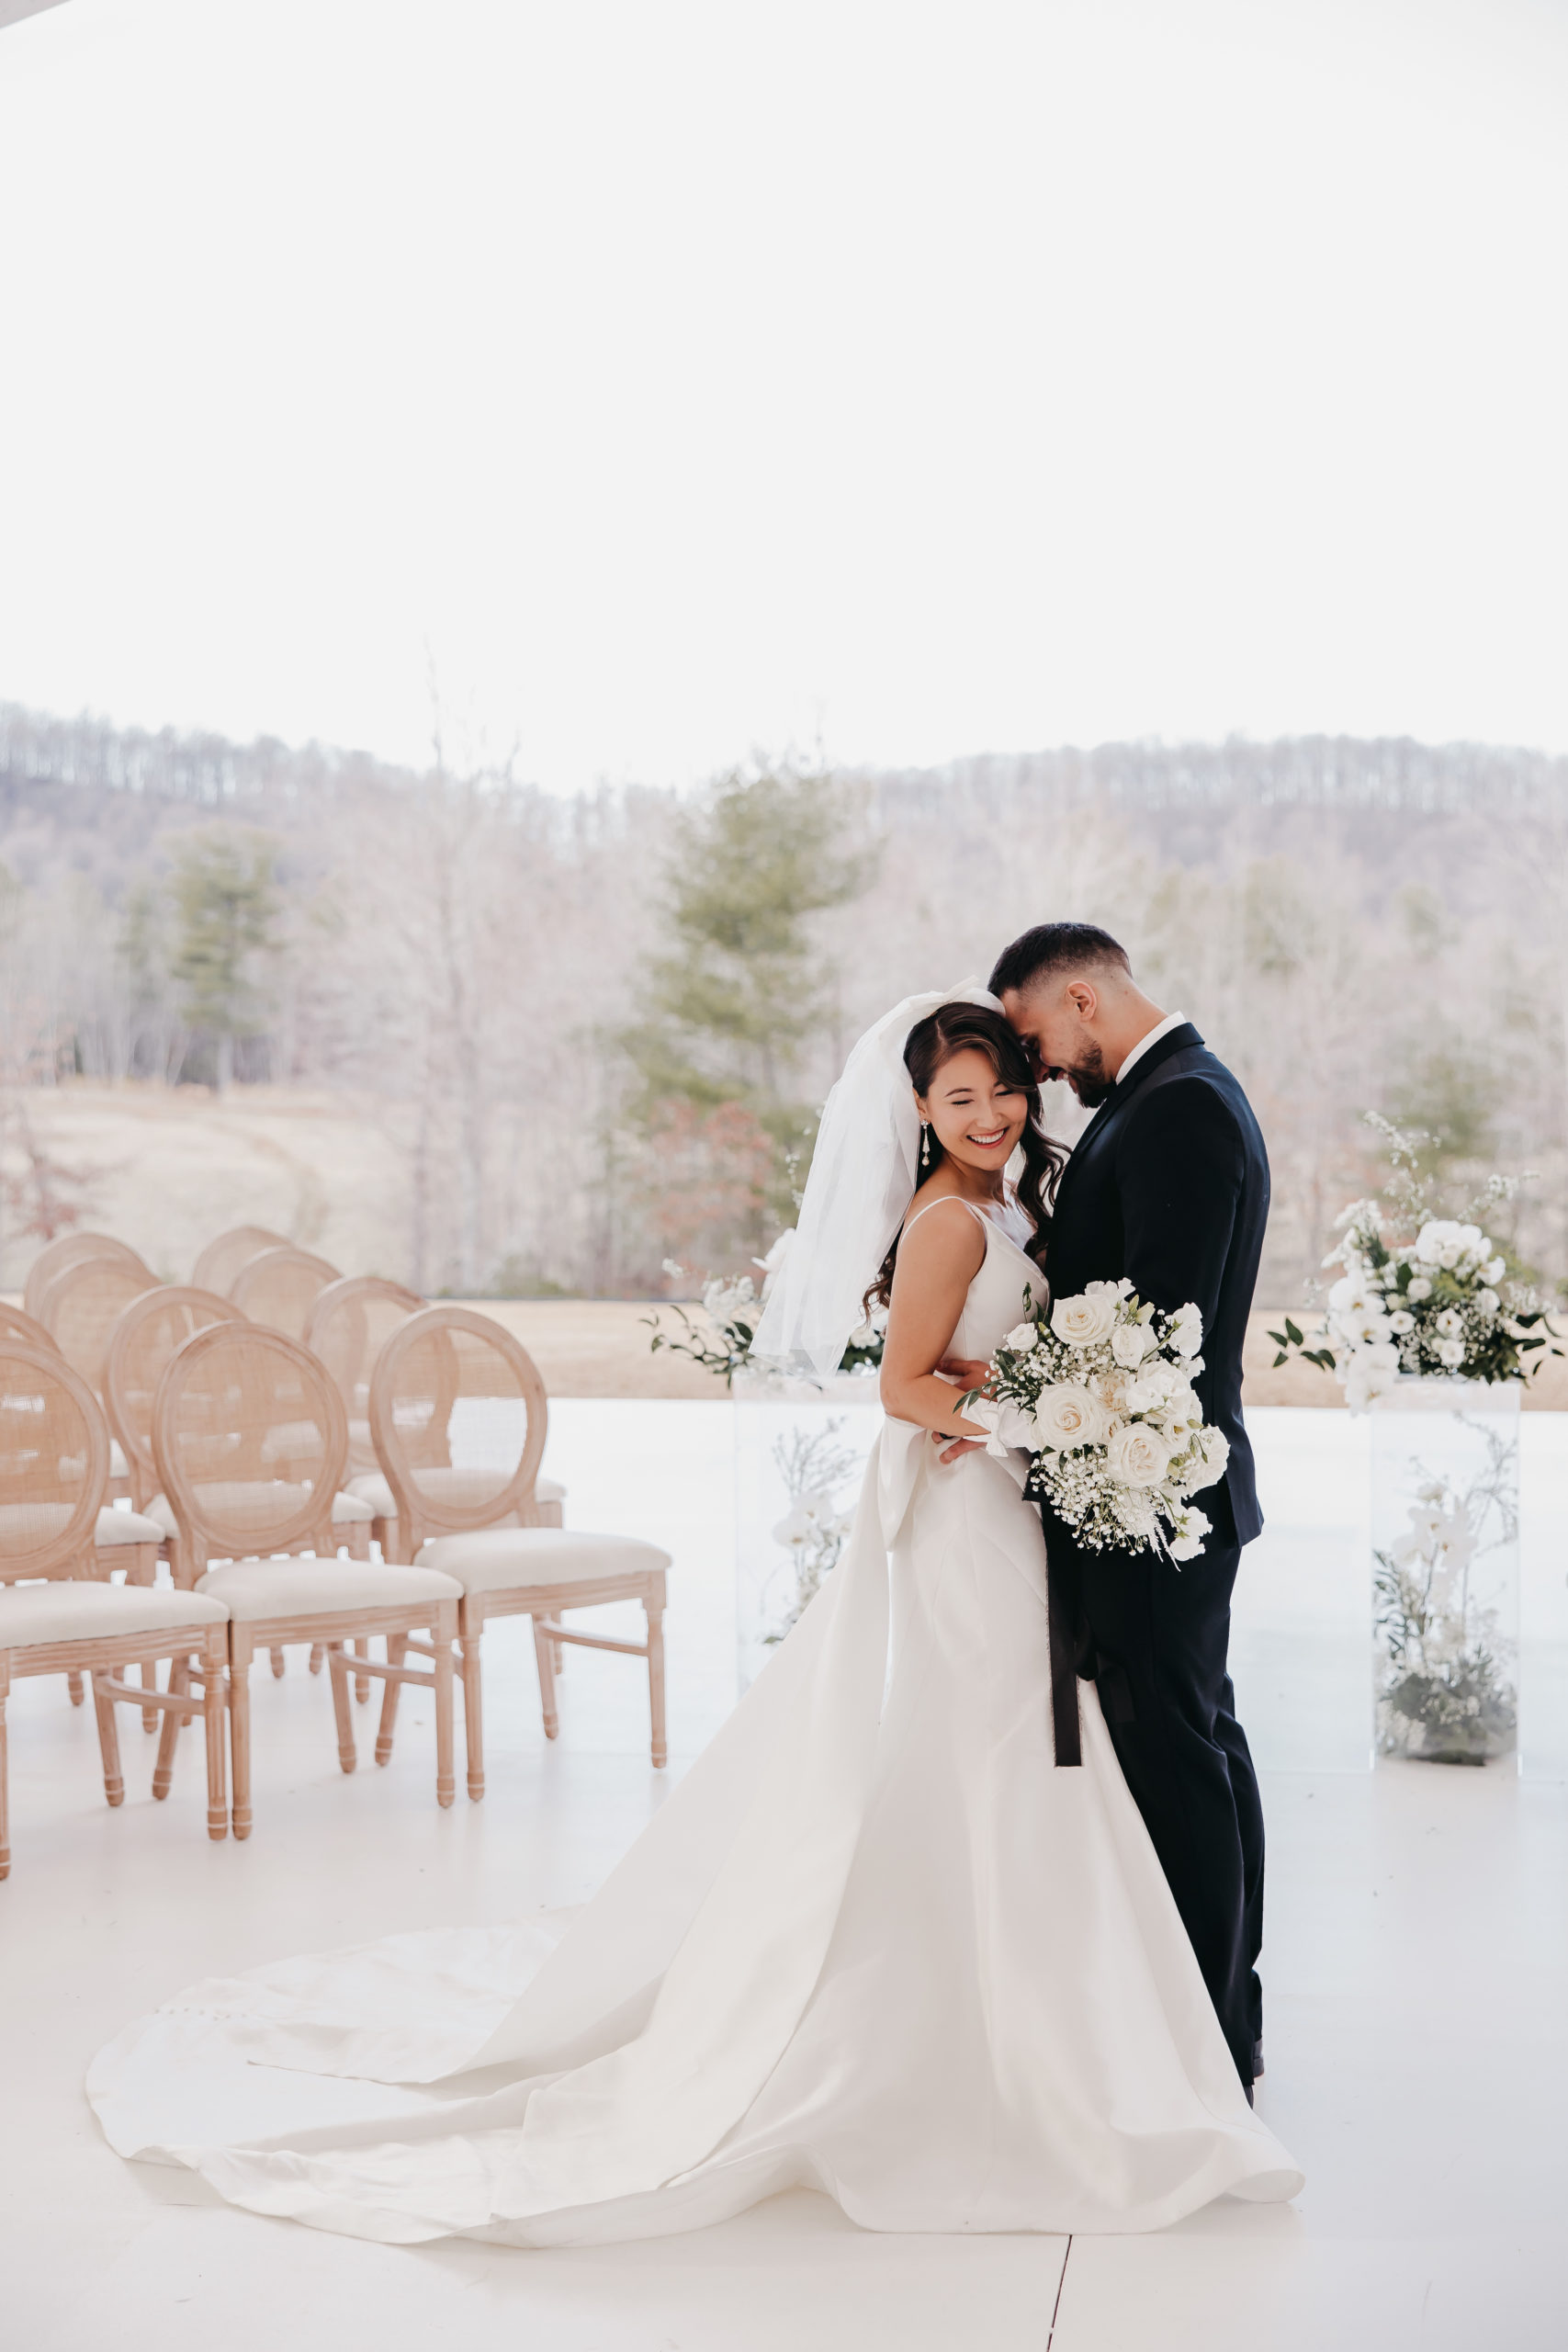 Couple sharing an embrace at their Virginia wedding venue taken by Rachel Yearick Photography